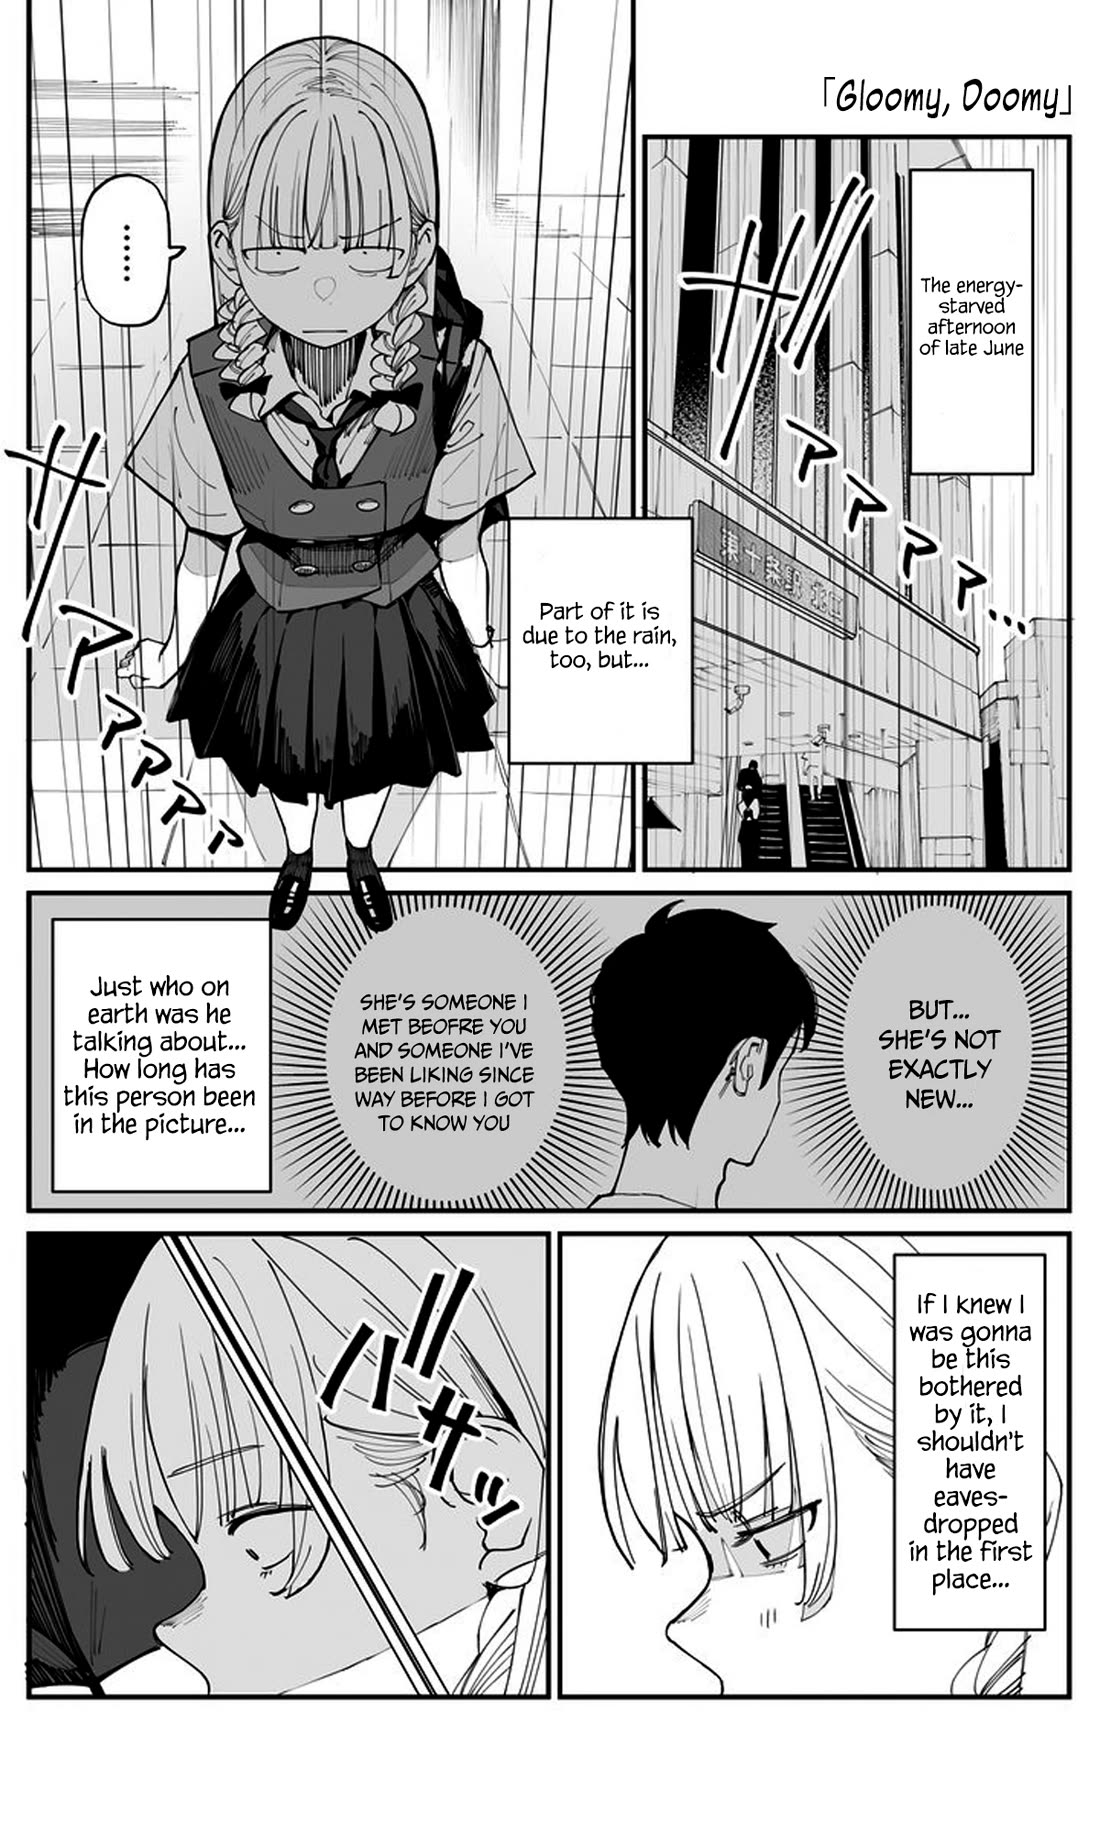 It's Quite Late, but I've Fallen in Love with My Childhood Friend - chapter 13 - #1